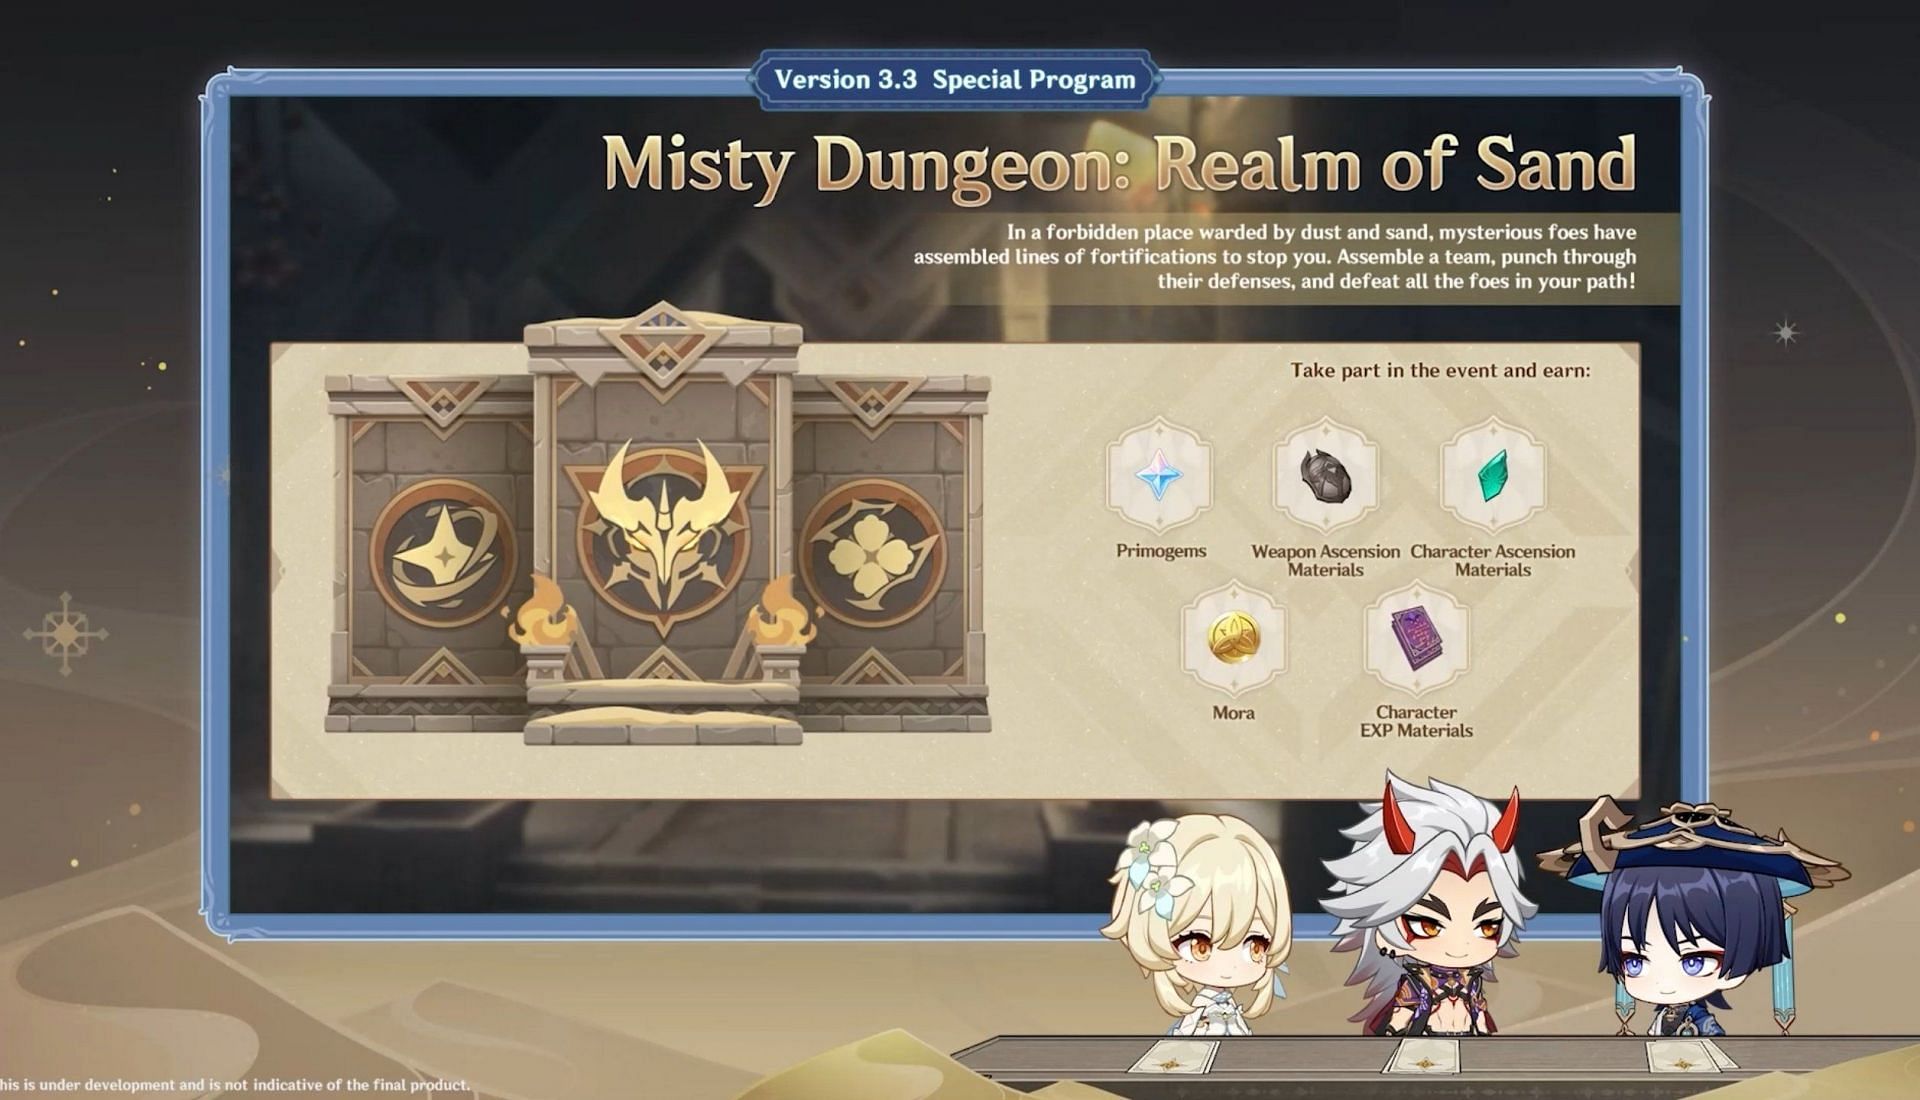 Misty Dungeon: Real of Sand (Image via HoYoverse)